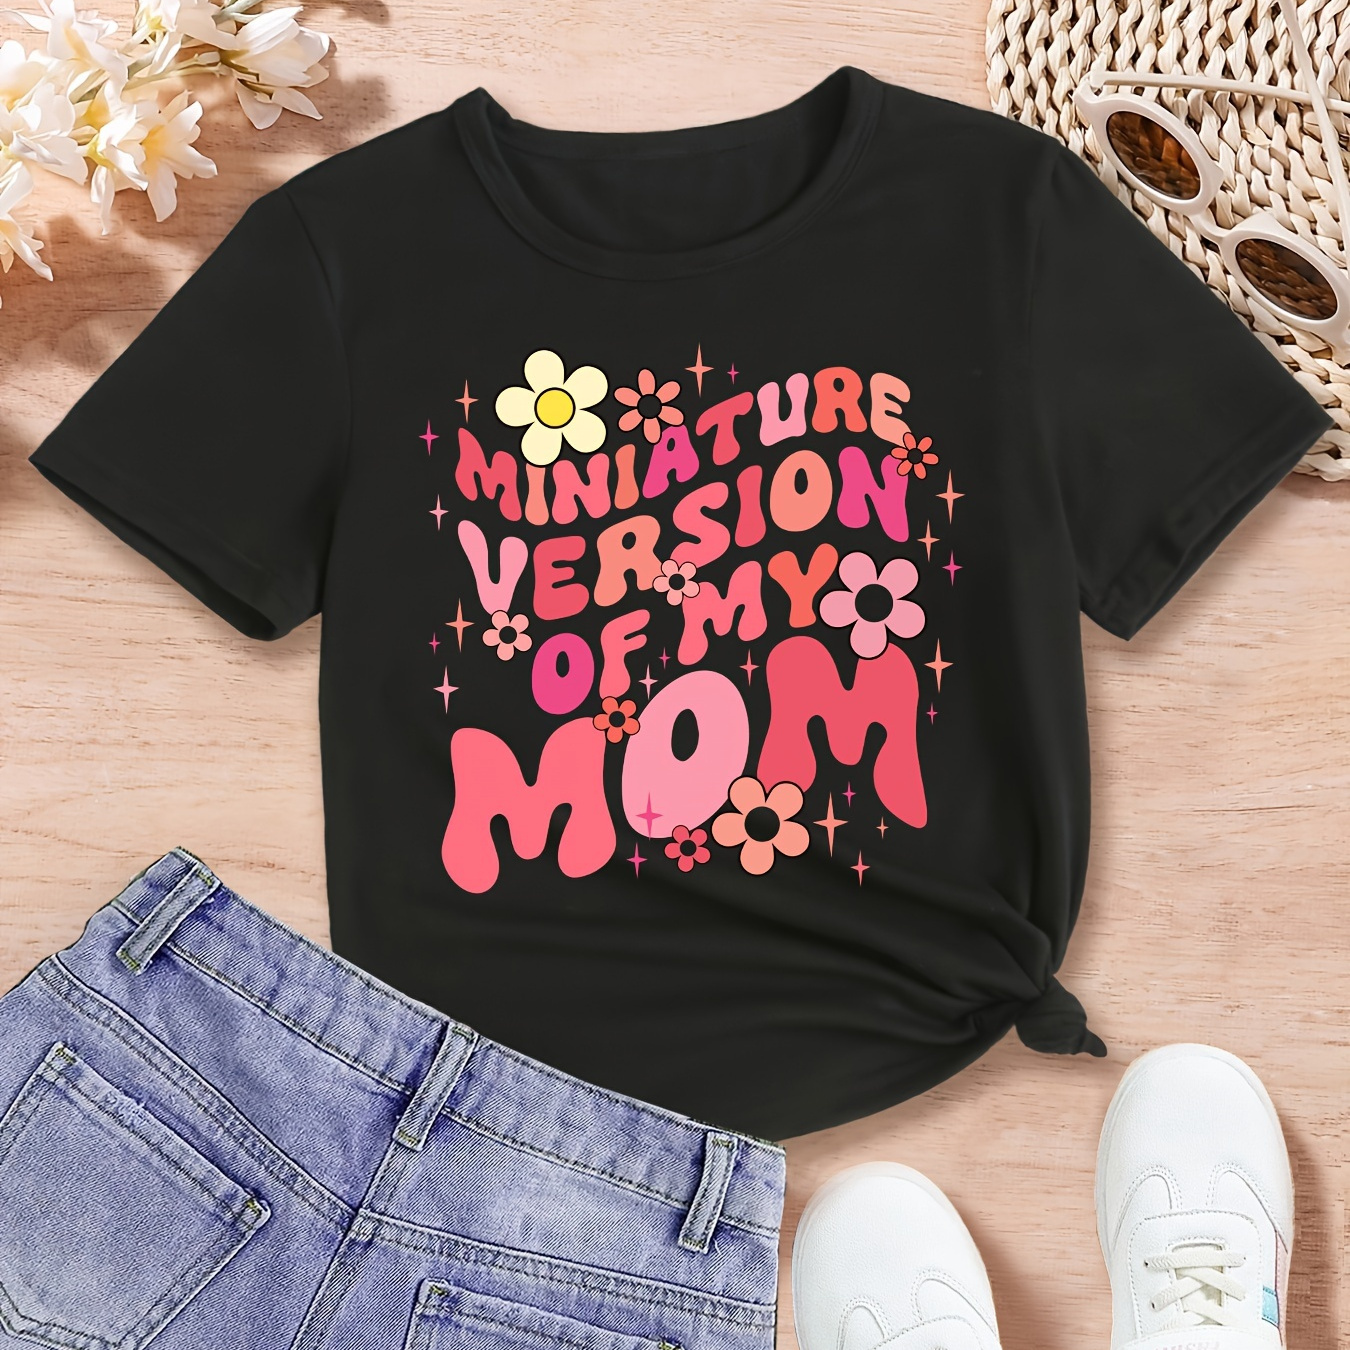 

Graffiti "miniature Version Of My Mom" With Flowers Graphic Print For Girls, Comfy And Fit T-shirt Top Pullover For Spring And Summer For Outdoor Activities